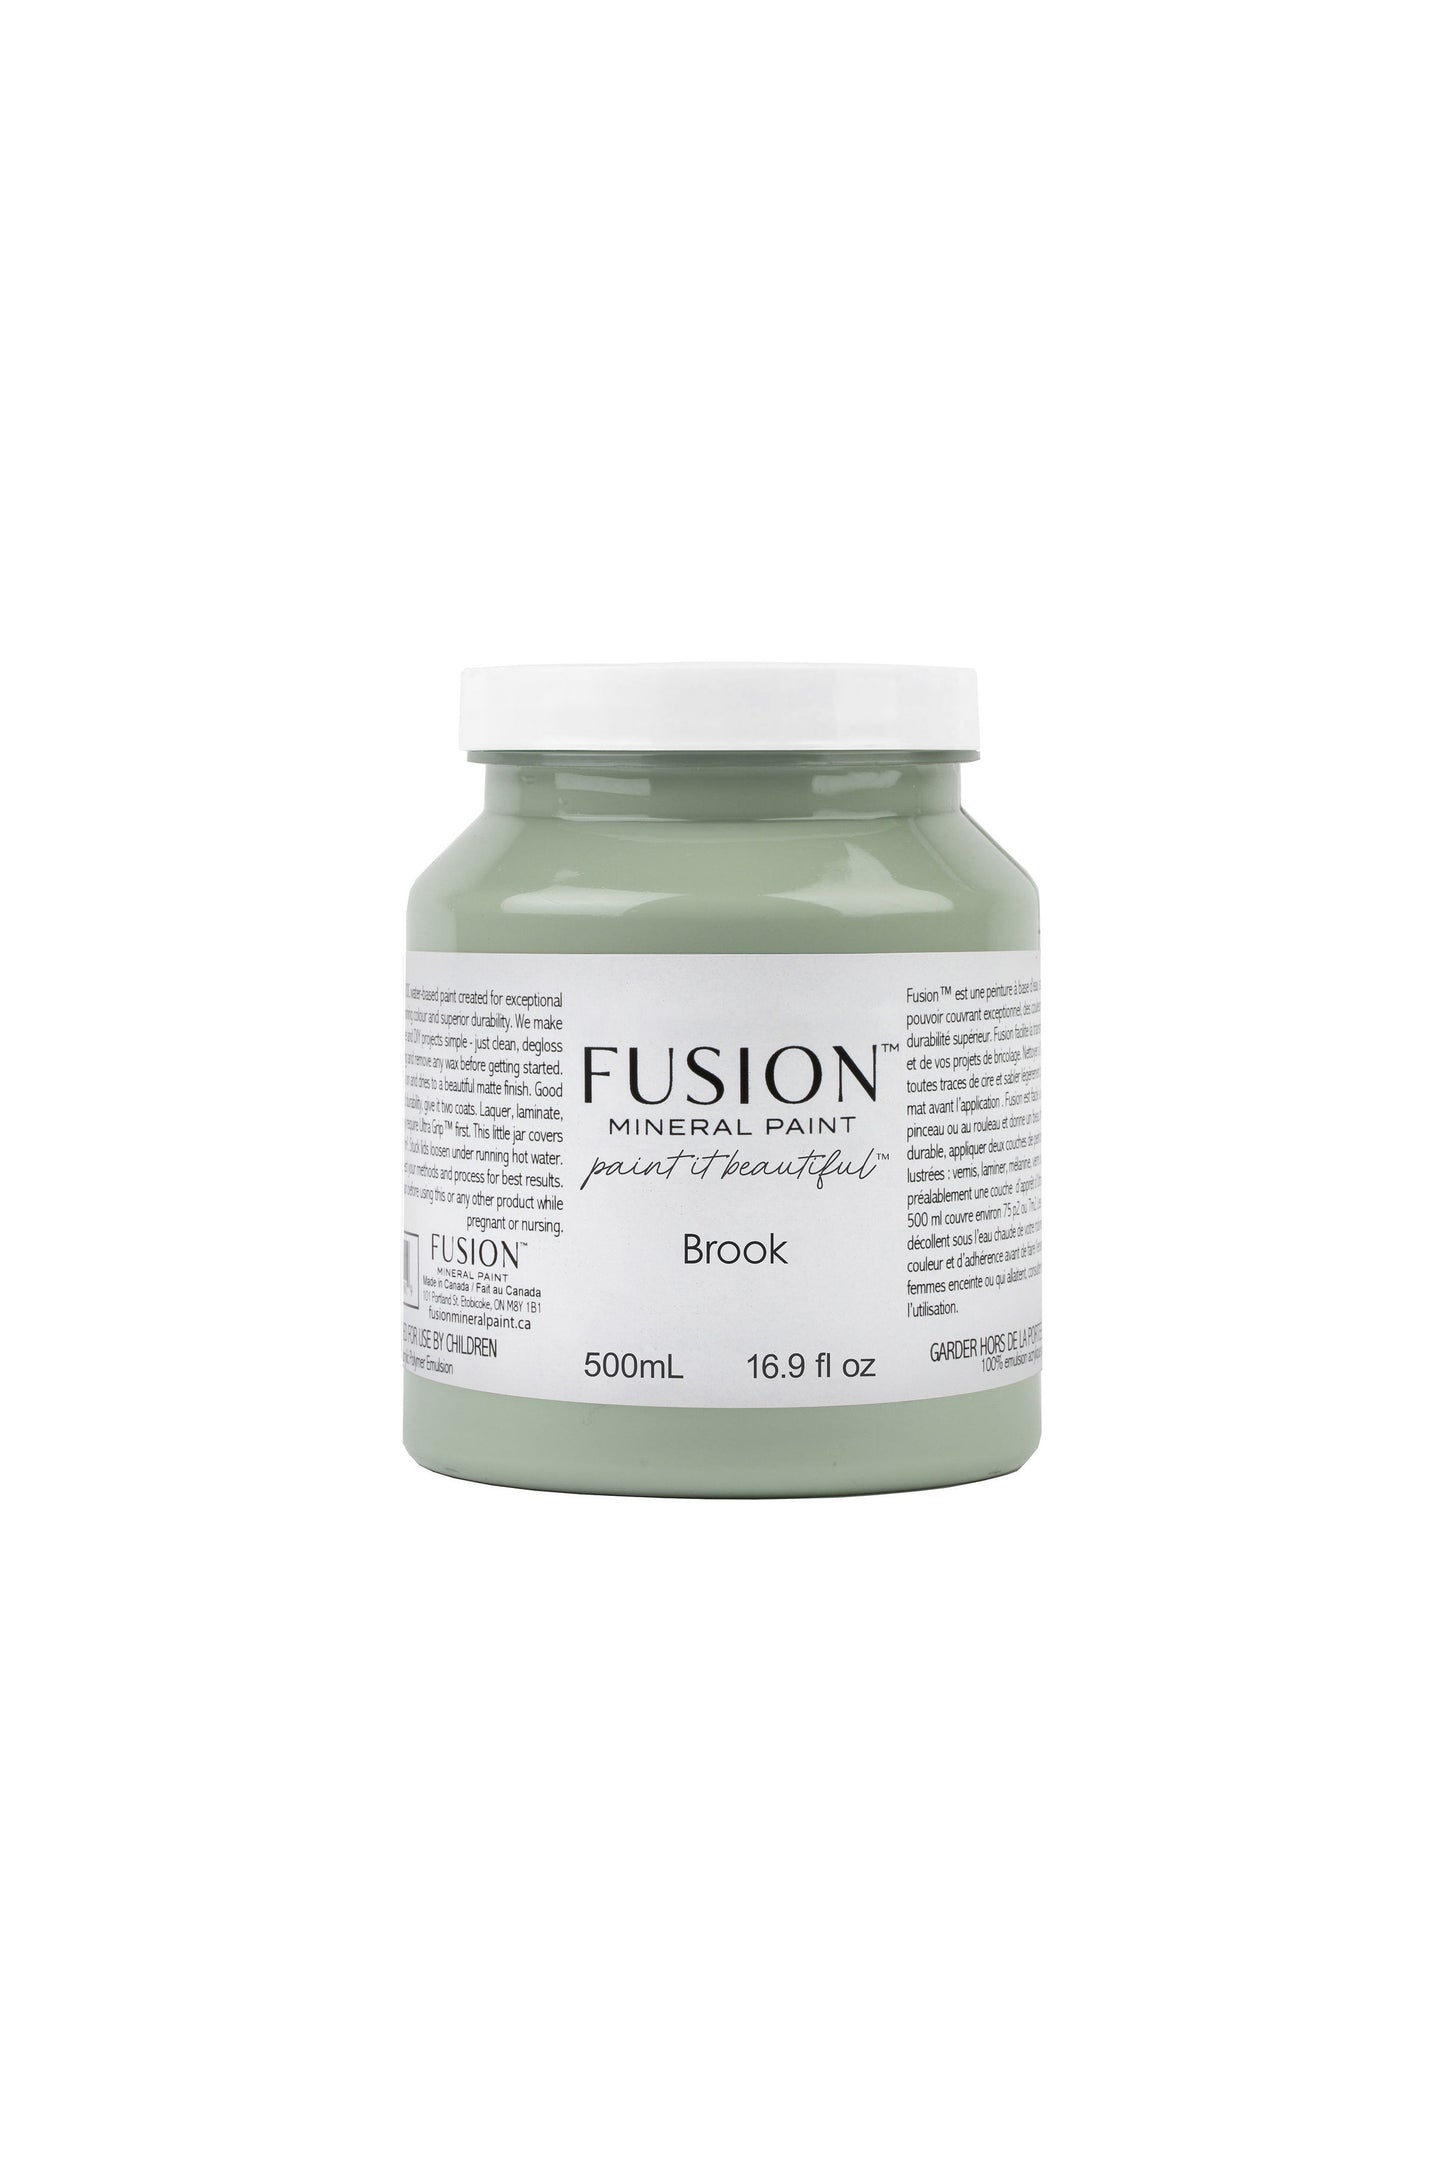 FUSION MINERAL PAINT- Brook